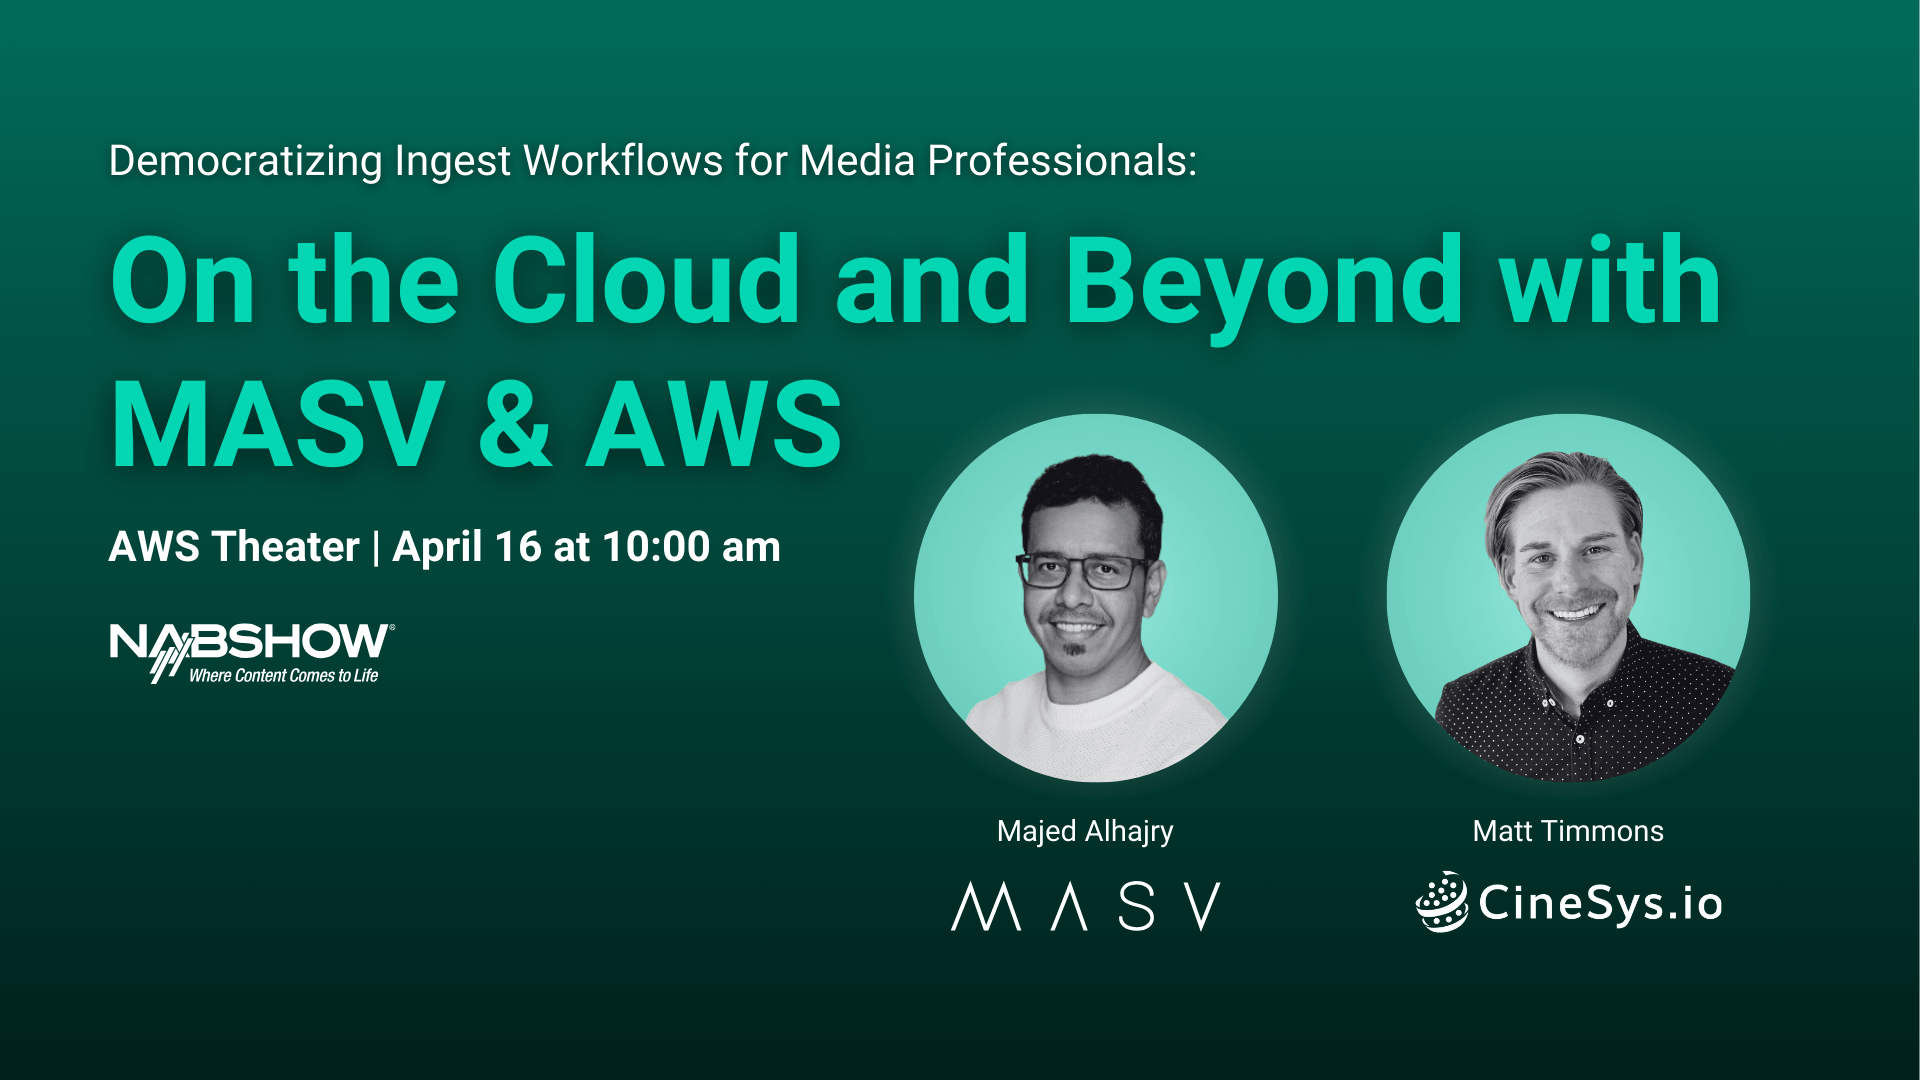 On the Cloud and Beyond with MASV & AWS